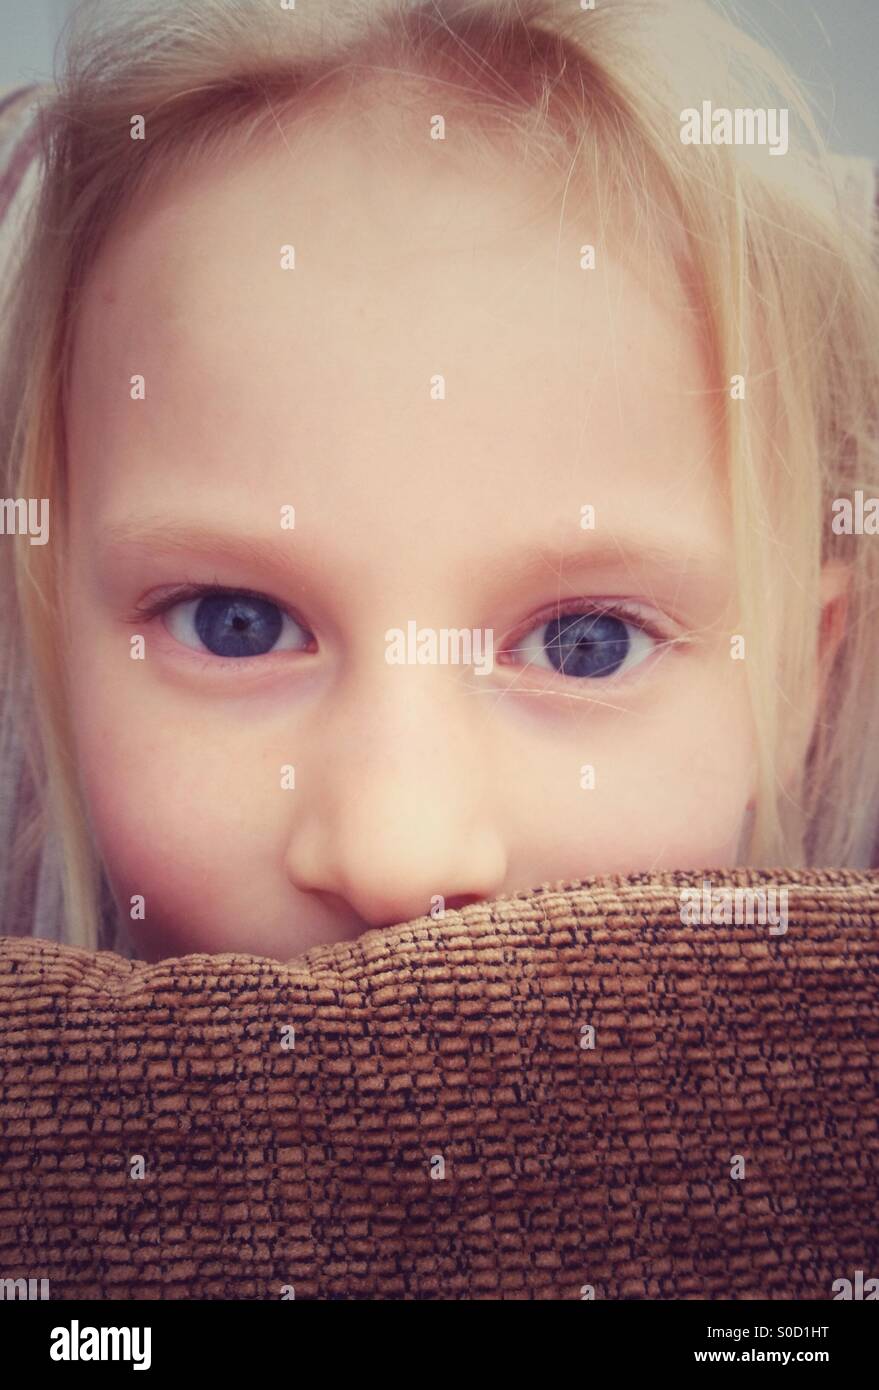 Young girl peering over cushion Stock Photo